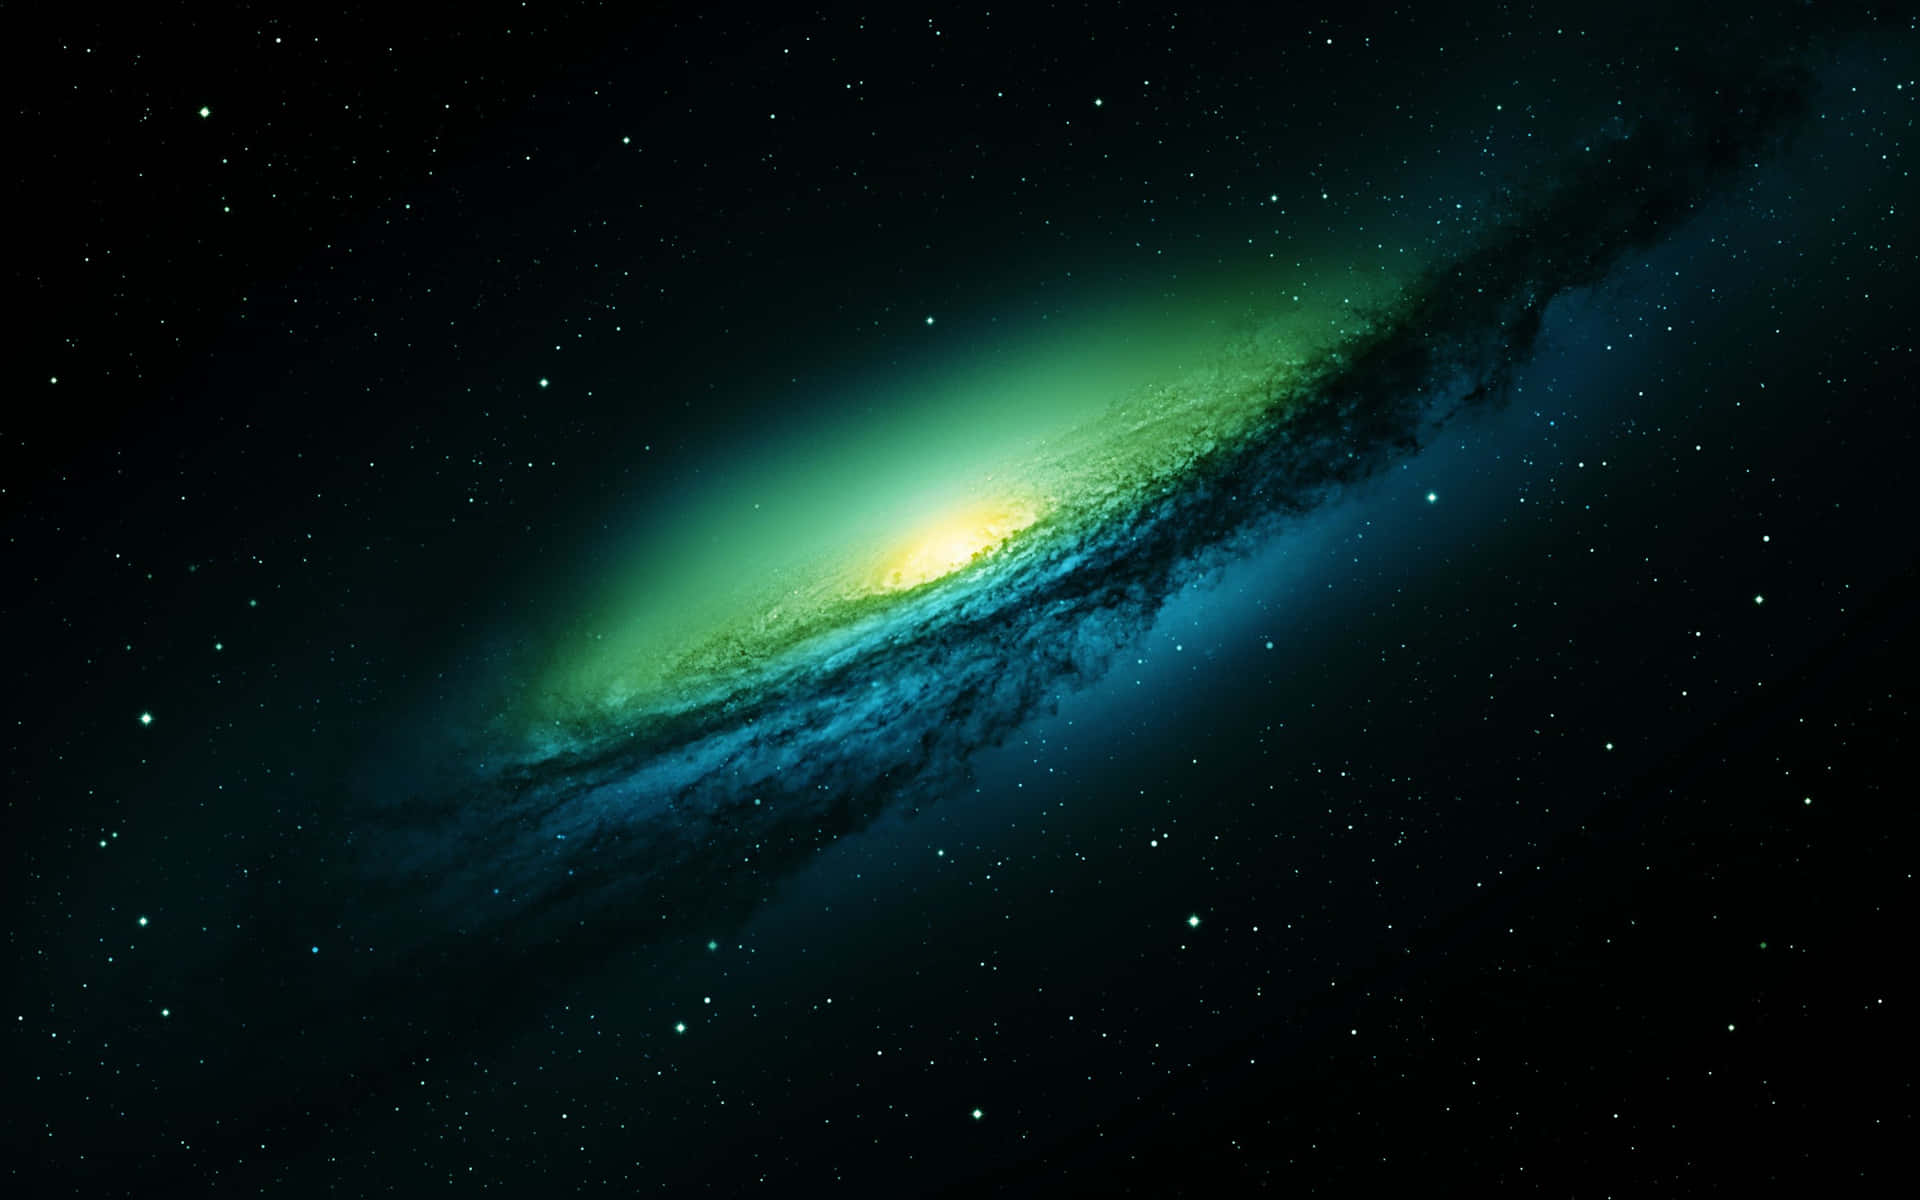 "Experience the wonders of the universe with a Green and Blue Galaxy" Wallpaper